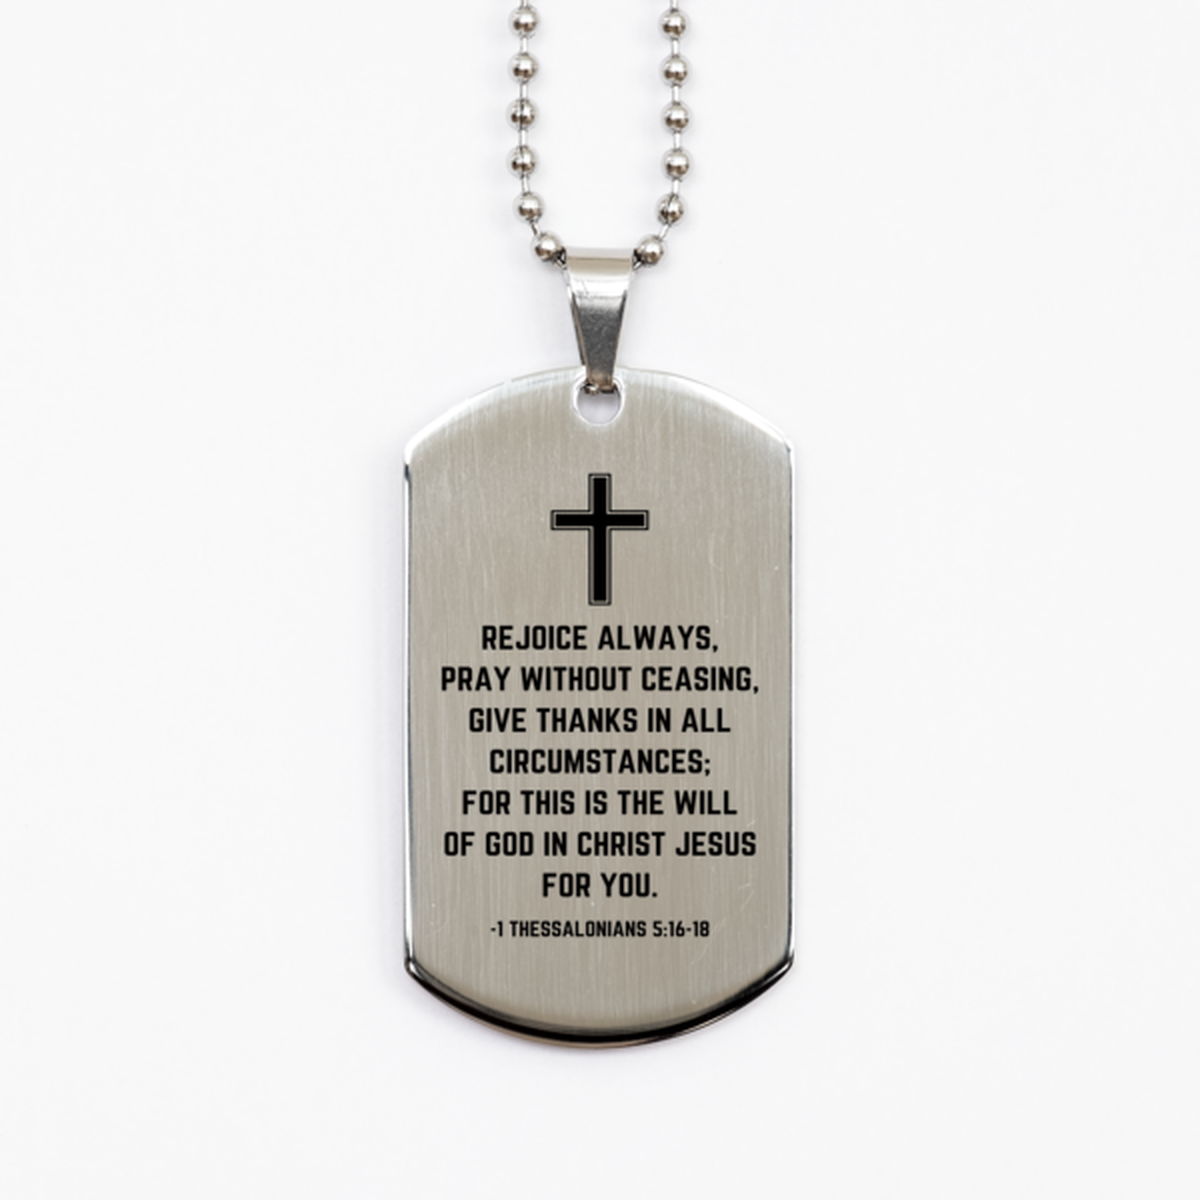 Baptism Gifts For Teenage Boys Girls, Christian Bible Verse Silver Dog Tag, Rejoice always, pray without ceasing, Confirmation Gifts, Bible Verse Necklace for Son, Godson, Grandson, Nephew